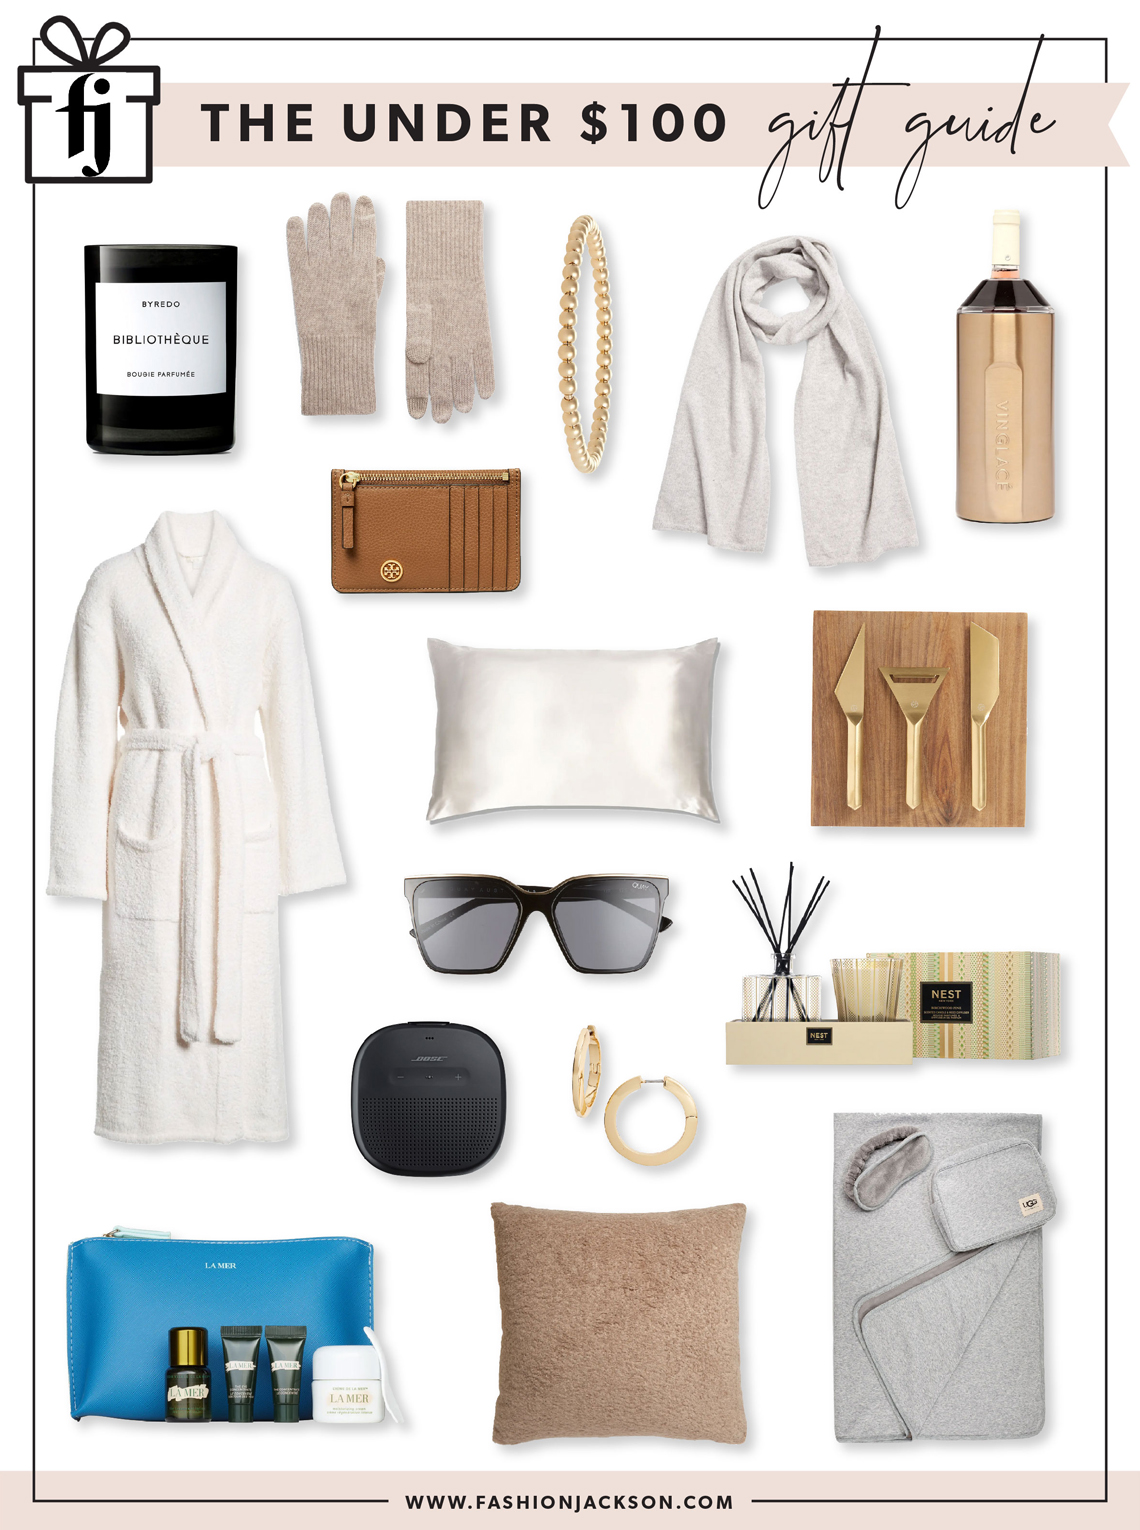 Fashion Jackson Holiday 2020 Nordstrom Under $100 Gift Guide